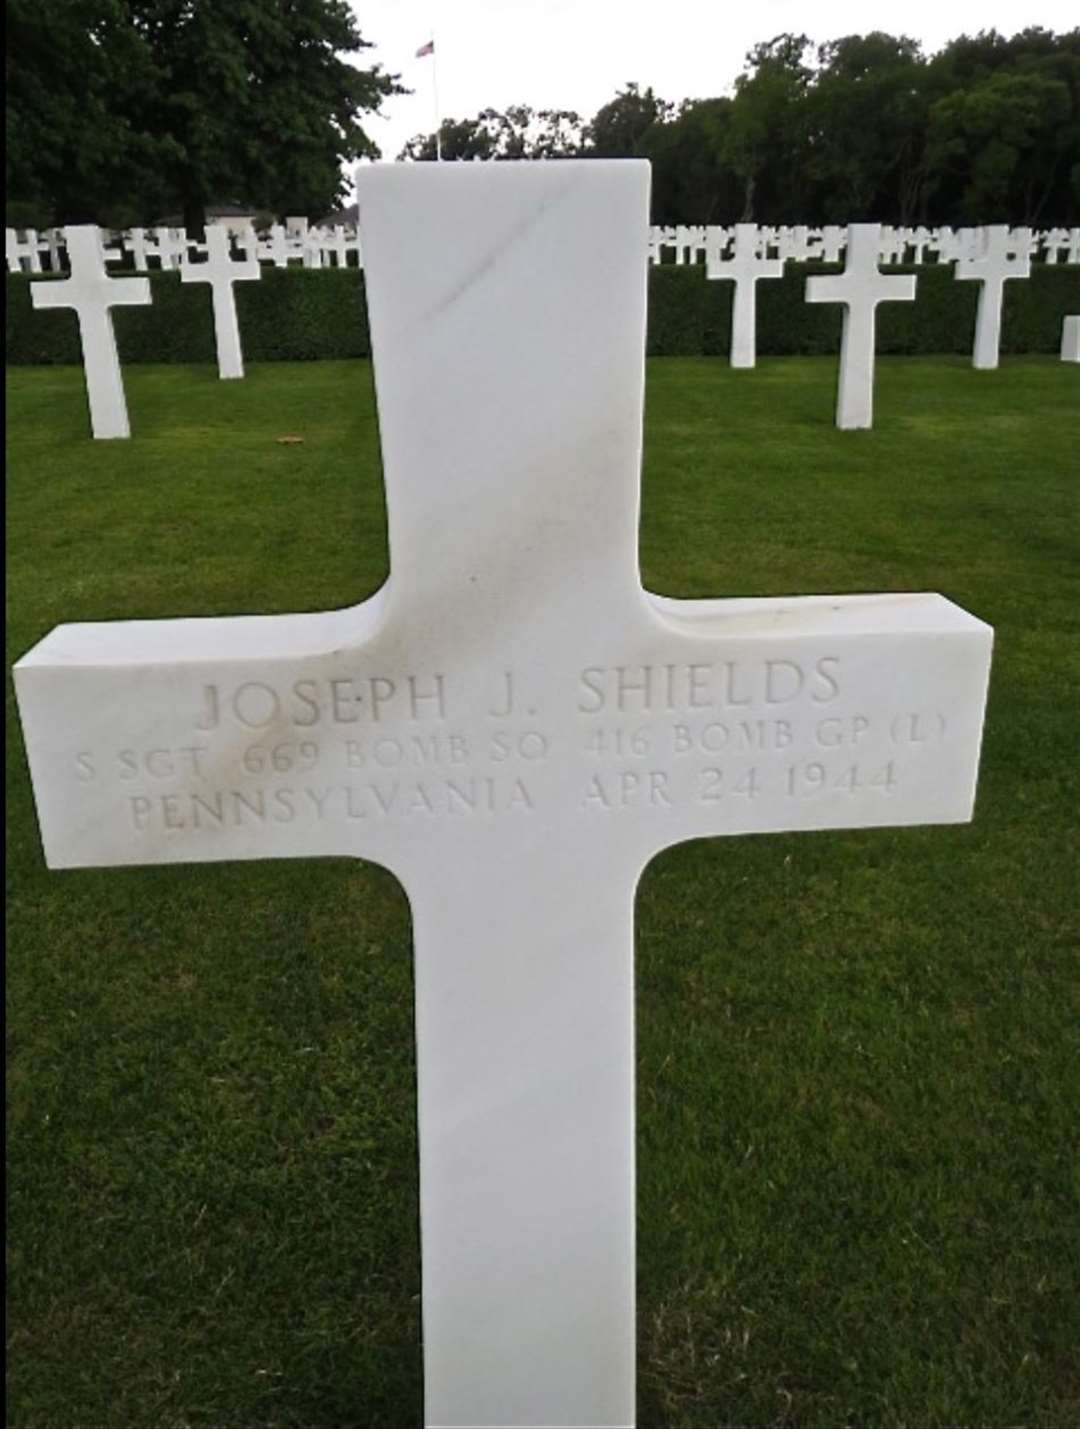 A second member of the American aircrew, Joseph Shields, who died in the A20 crash is buried at the US military cemetery in Cambridge